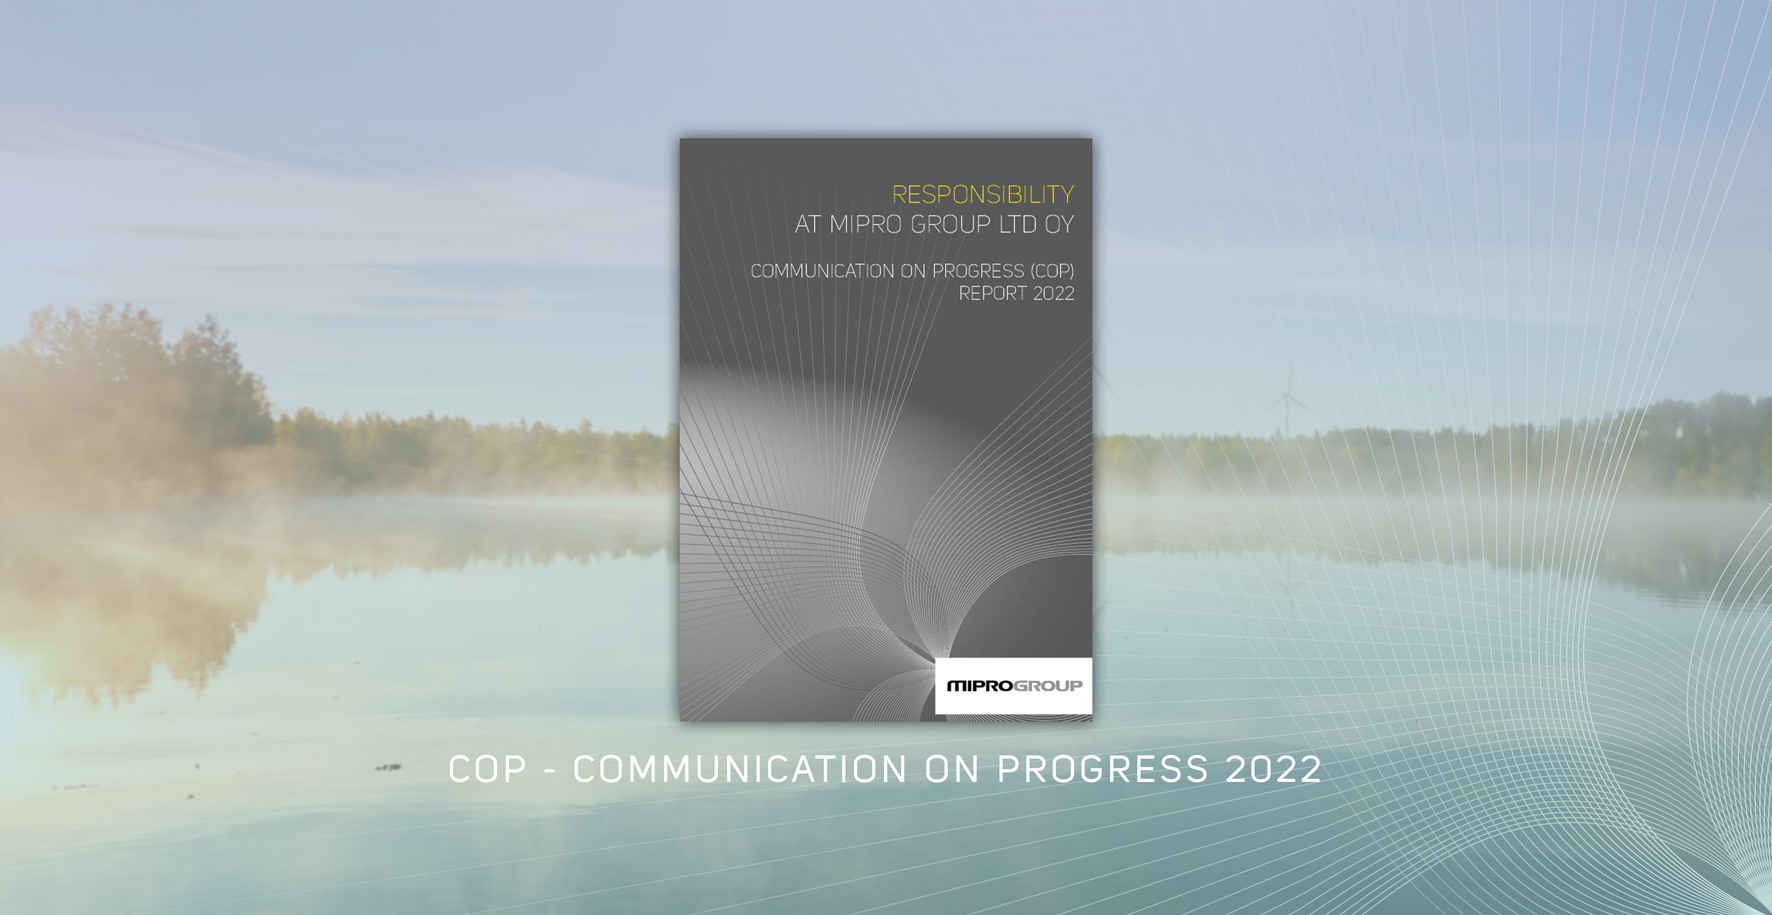 Corporate Responsibility Report 2022 (COP – Communication on Progress) has been published